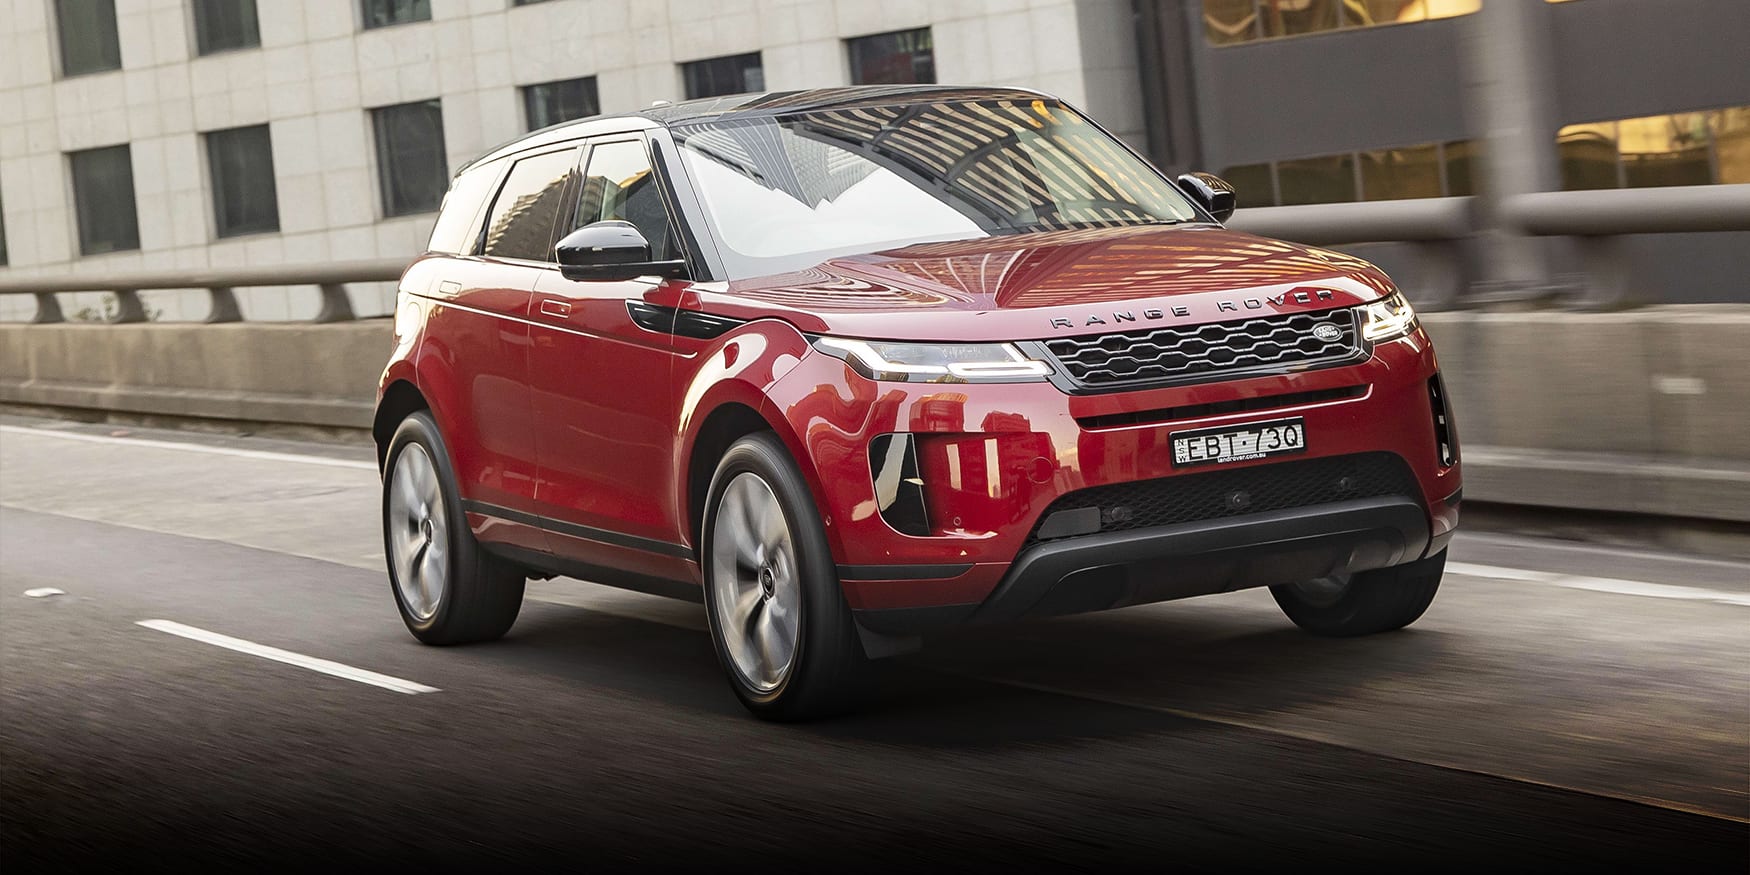 Range Rover Evoque Used Australia  - We Hope You�lL Have Fun Using It!